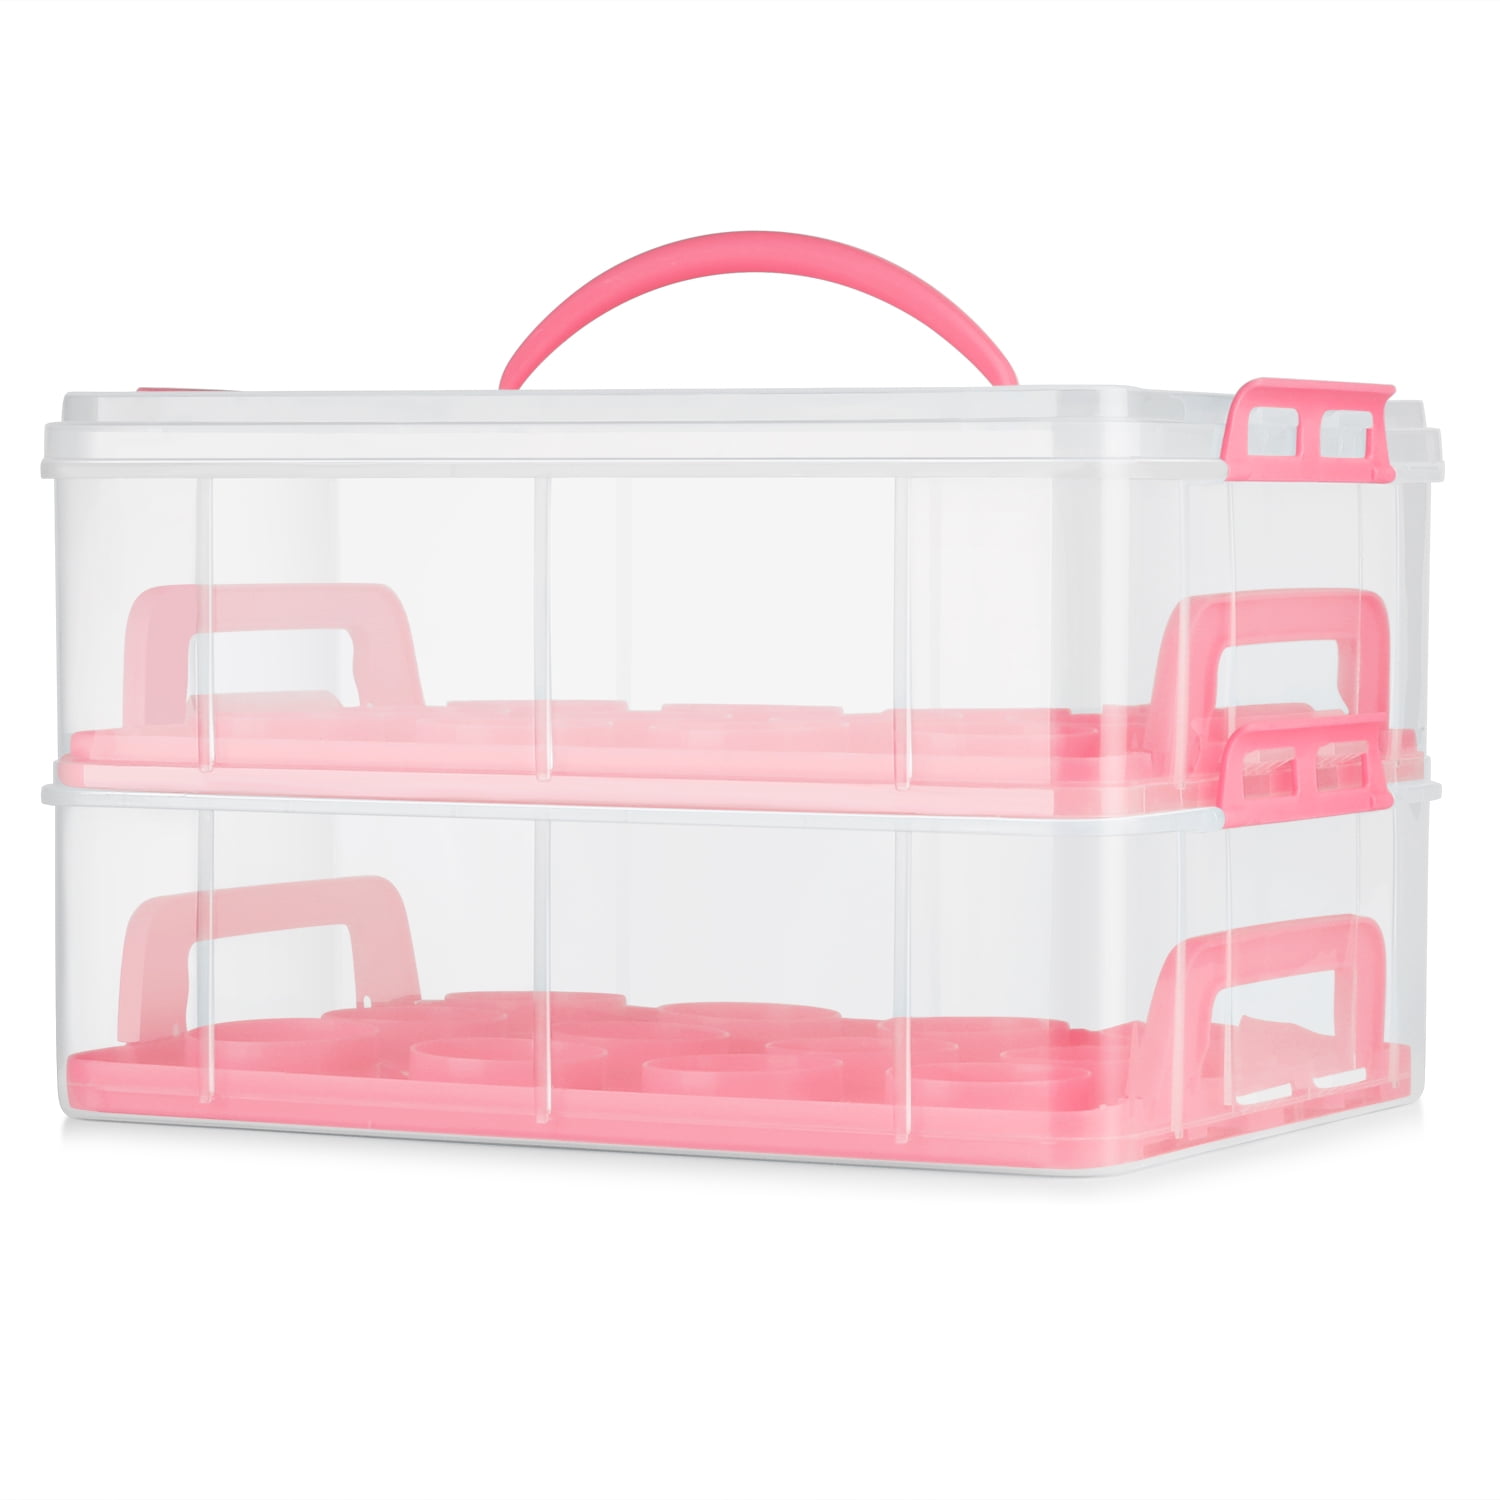 Juvale 3 Tier Cupcake Carrier with Lid and Handle, Holds 36 Cupcakes (Pink, 13.5 x 10.25 x 10.75 in)